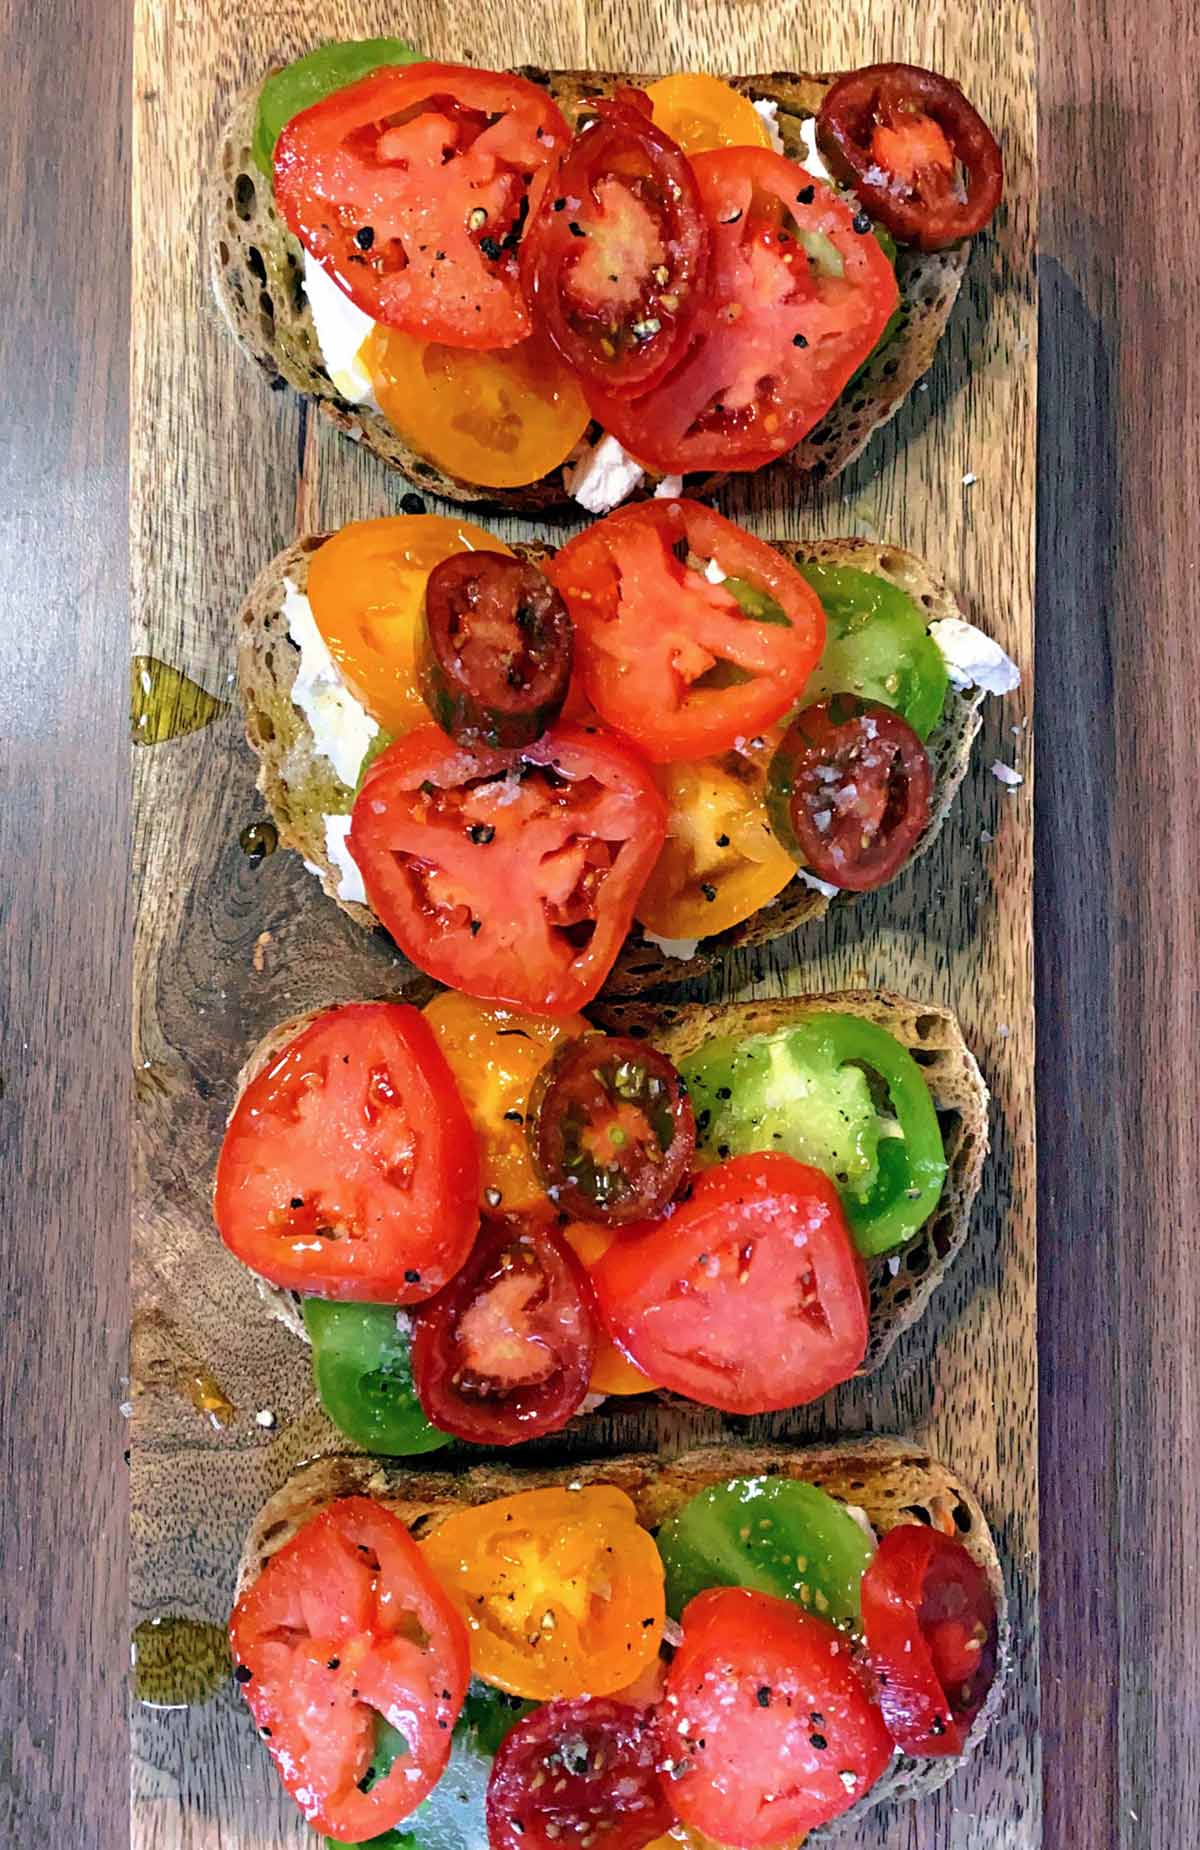 Slices of red, yellow and green tomatoes added to the toast.